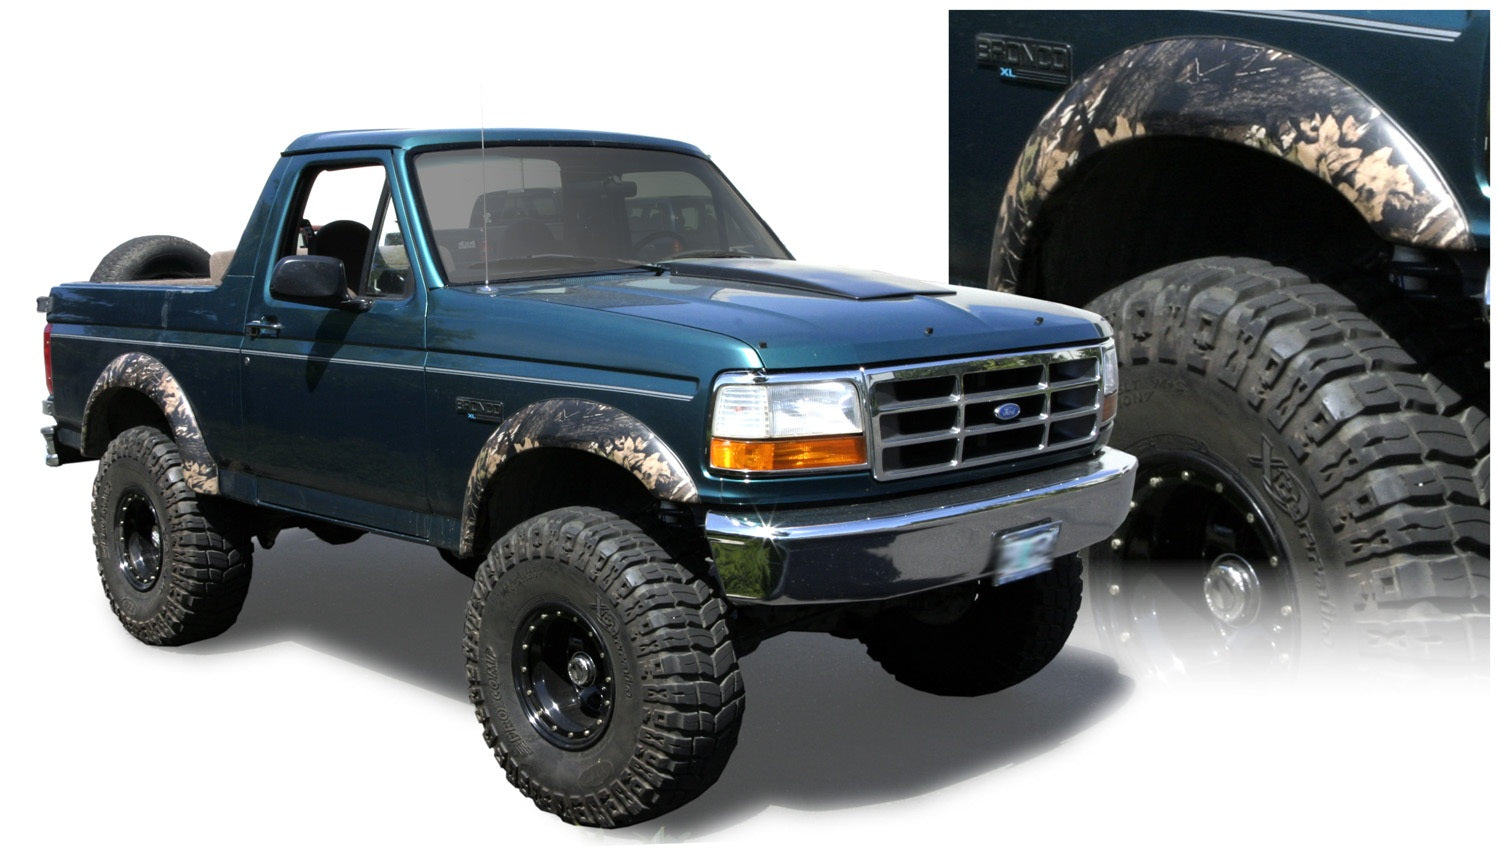 Bushwacker 20020-11 Black Extend-A-Fender Style Smooth Finish Rear Fender Flares for 1992-1996 Ford Bronco, F-150, F-250; 1992-1997 F-350 Super Duty (Excludes Dually)